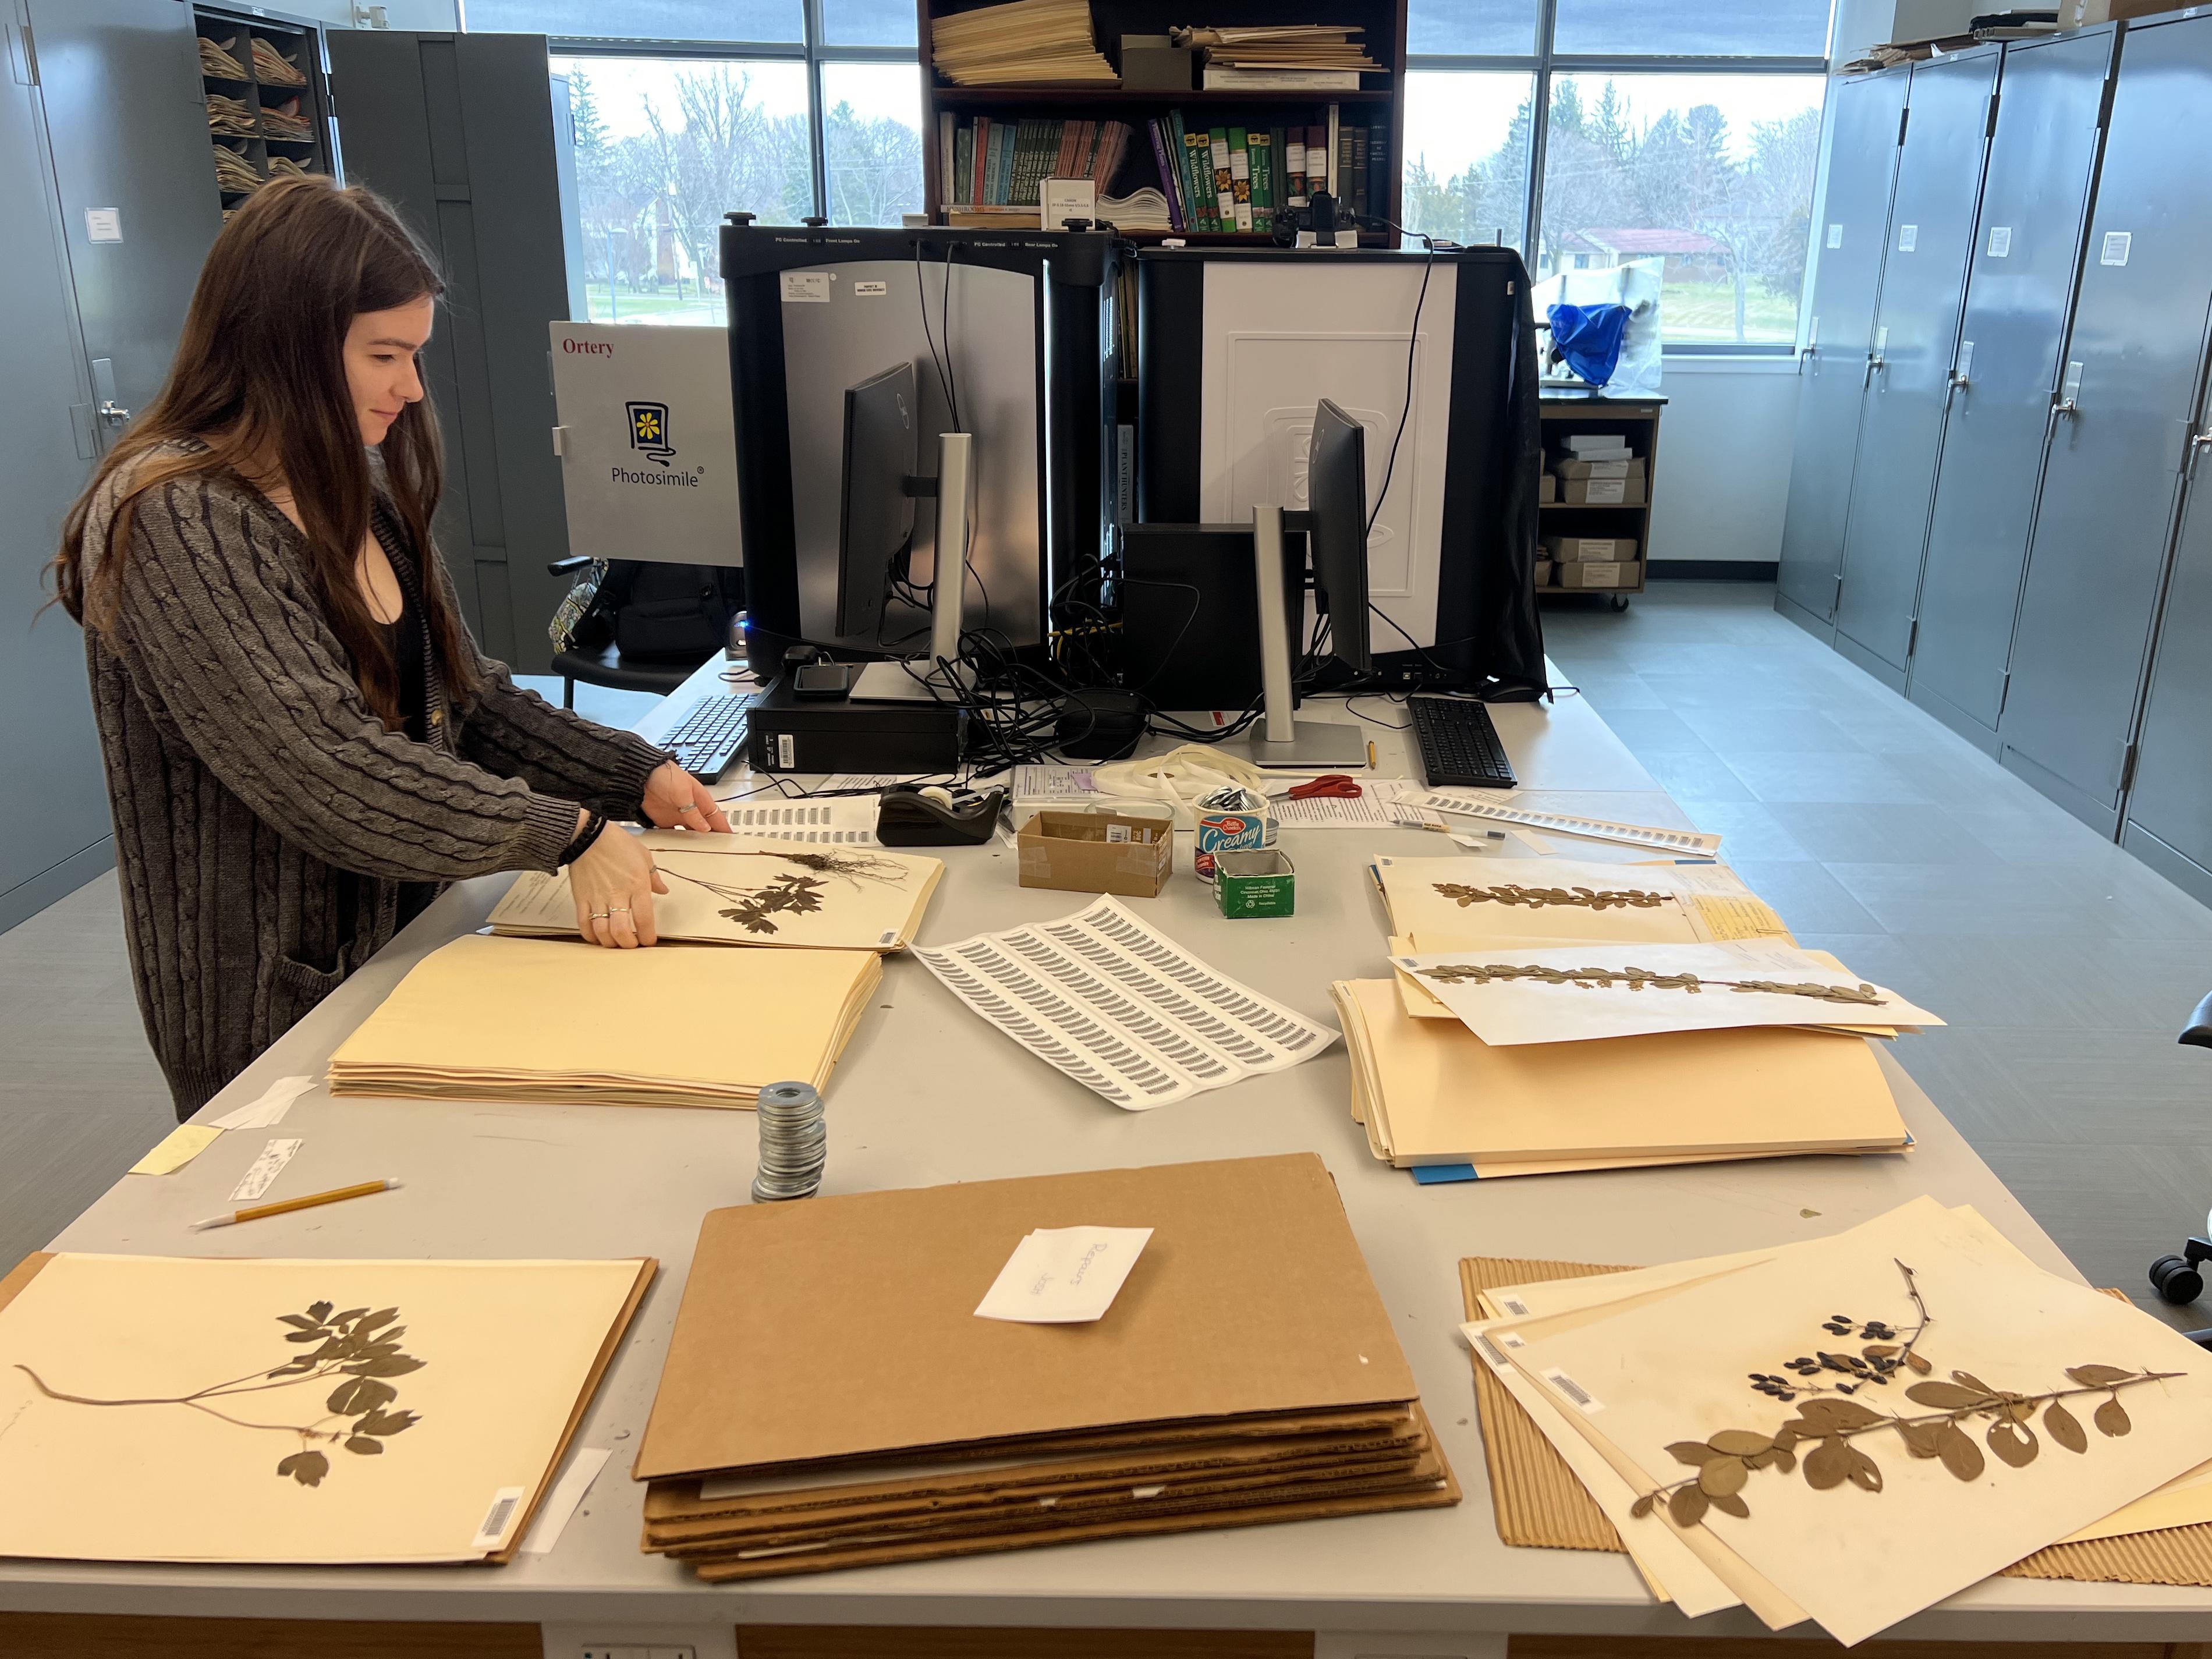 Students are helping digitizing preserved plants in the SUNY Oswego herbarium in the Shineman Center